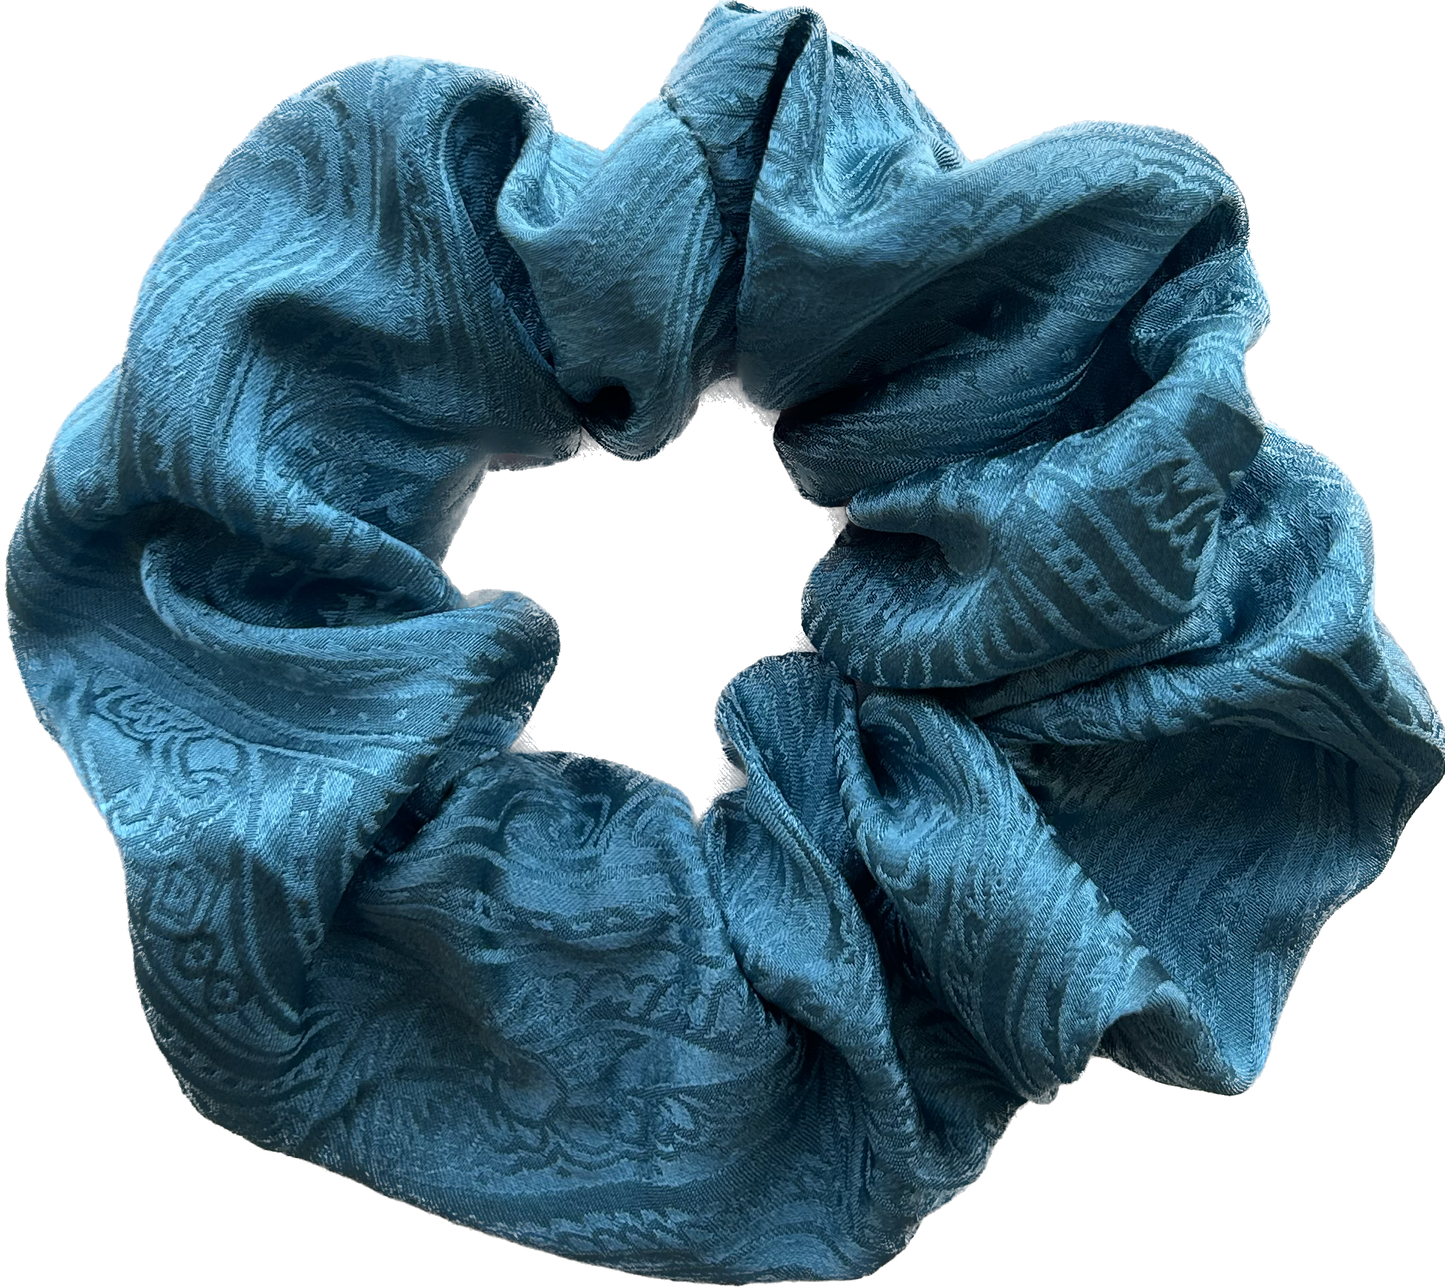 100% Silk Hand-Dyed Scrunchie- “Teal" Jacquard